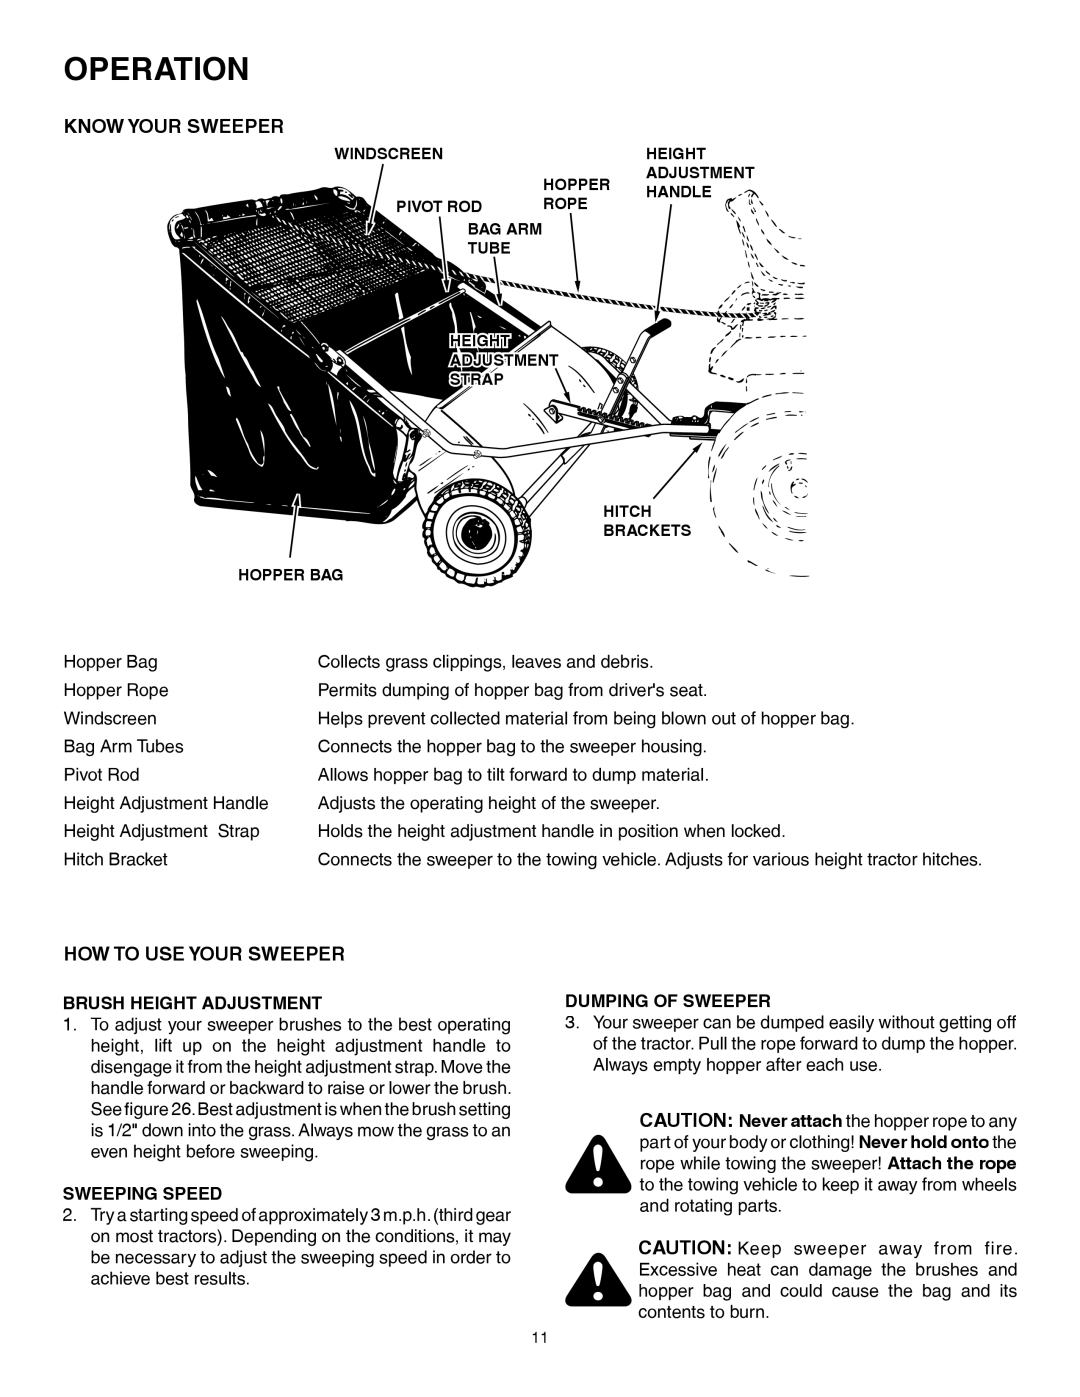 Husqvarna 45-0352 manual Operation, Know Your Sweeper, How To Use Your Sweeper, Brush Height Adjustment, Sweeping Speed 